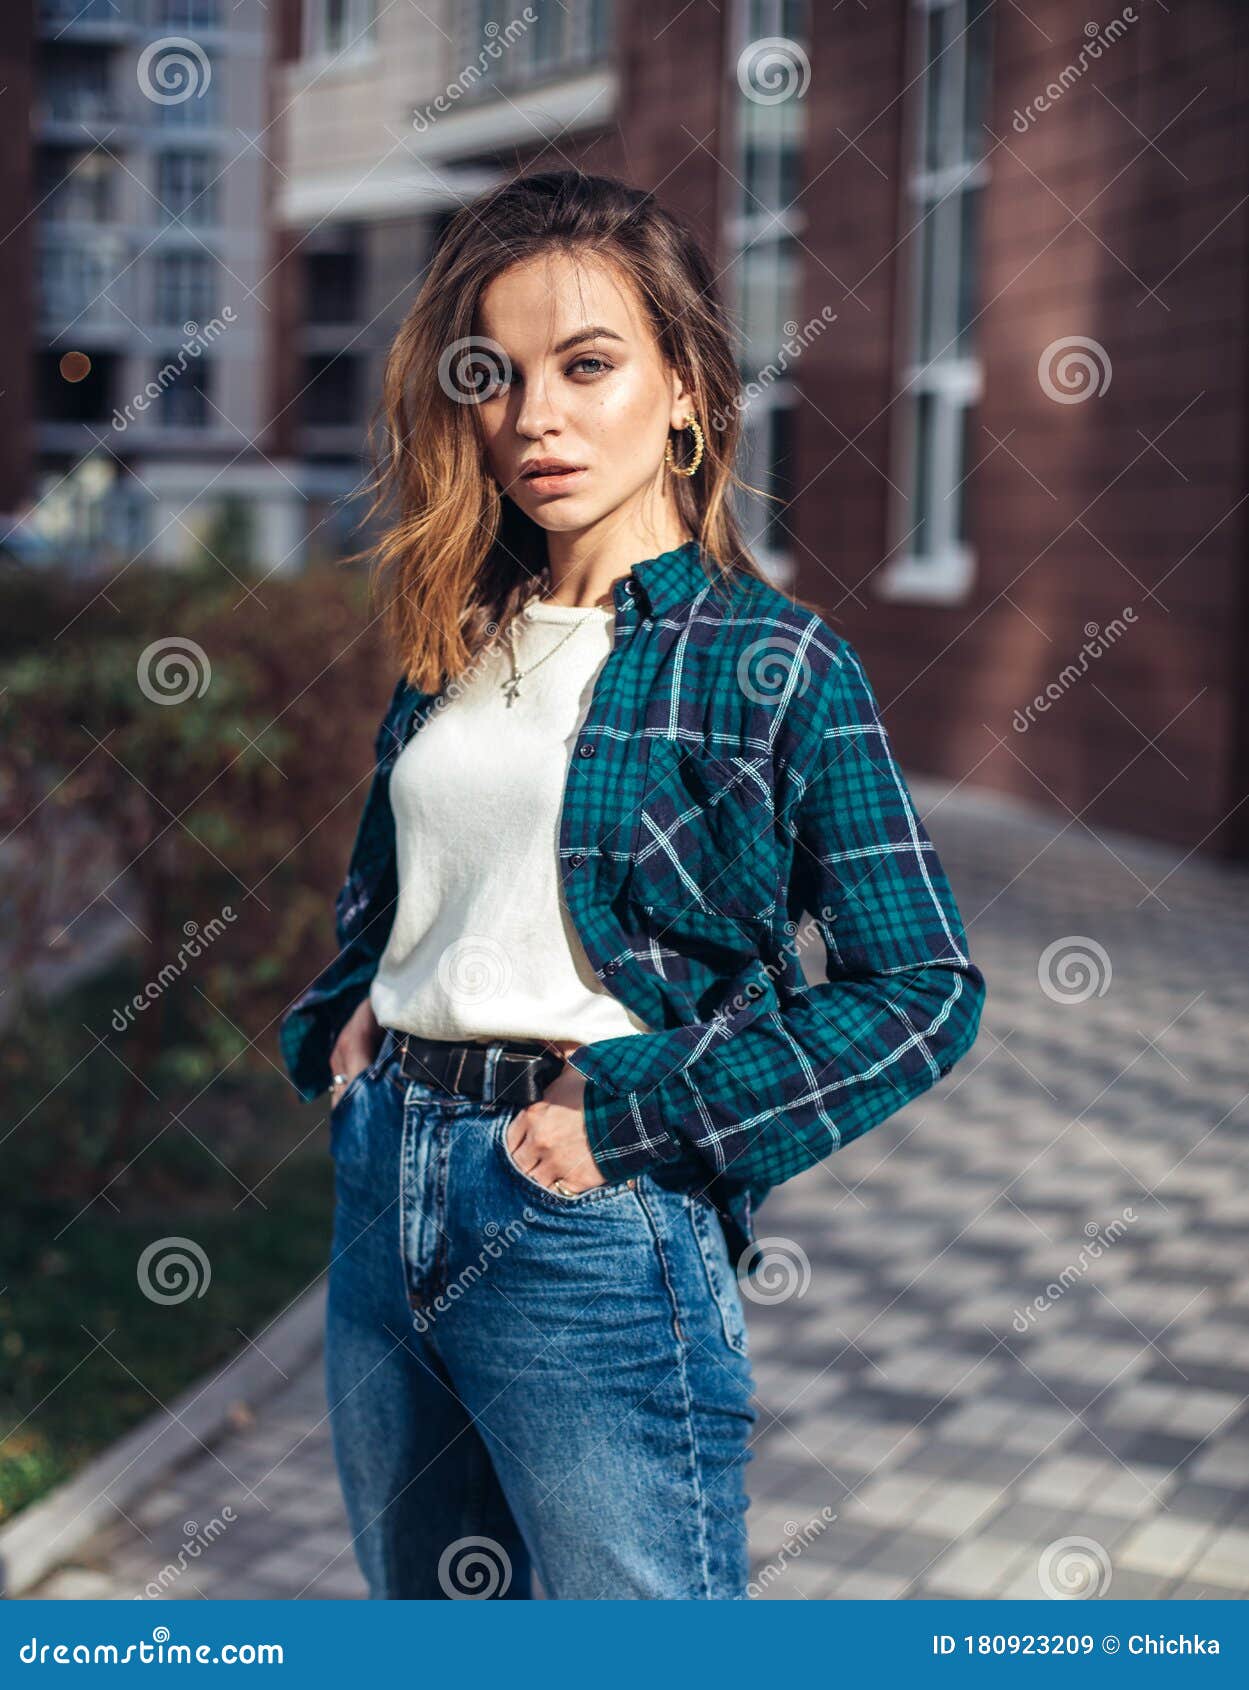 https://thumbs.dreamstime.com/z/fashion-hipster-woman-posing-outdoor-plaid-shirt-fashionable-high-waisted-jeans-brunette-hair-trendy-fashion-style-fashion-hipster-180923209.jpg